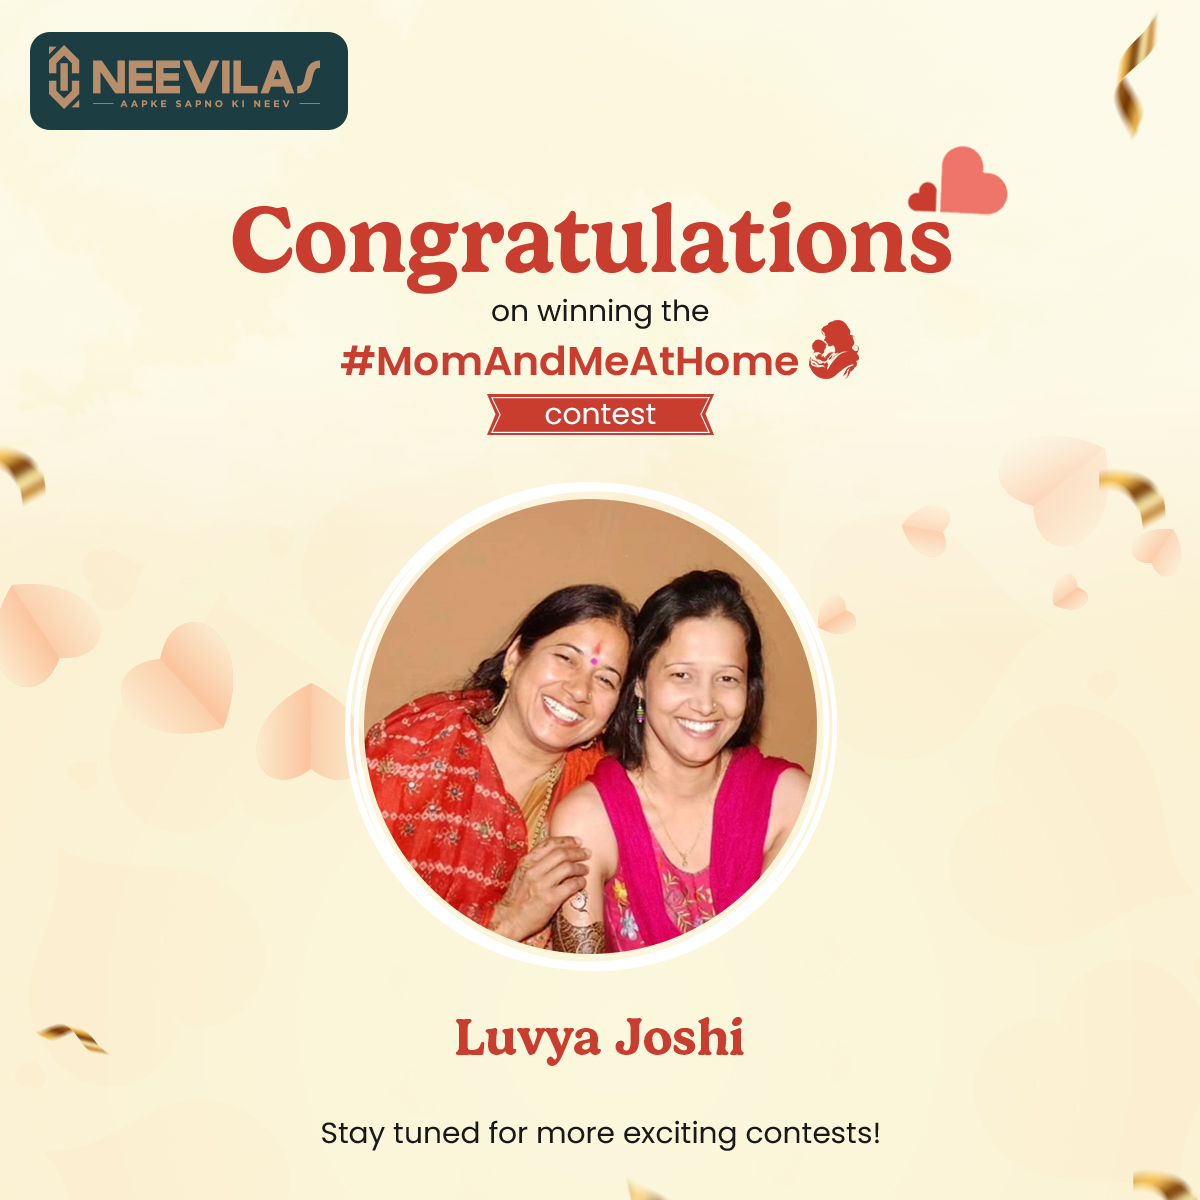 🥳 Drumroll, please! We are thrilled to announce Luvya Joshi as the winner of our #MomAndMeAtHome contest.